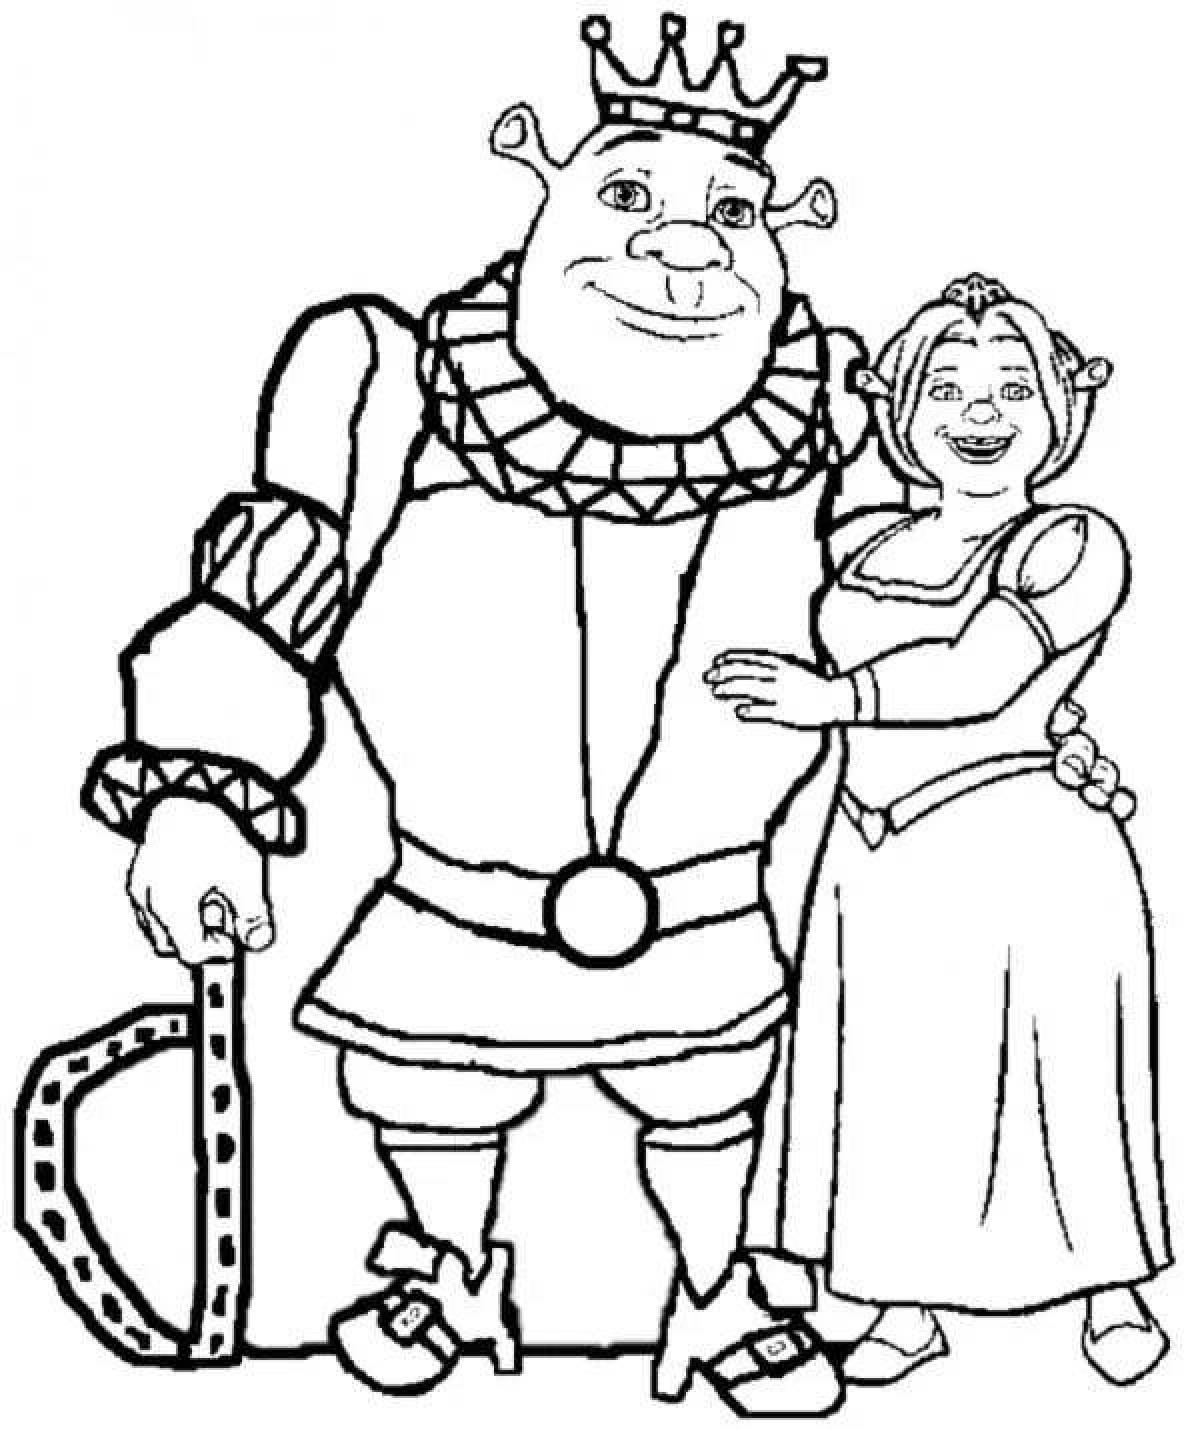 Exotic shrek and fiona coloring book